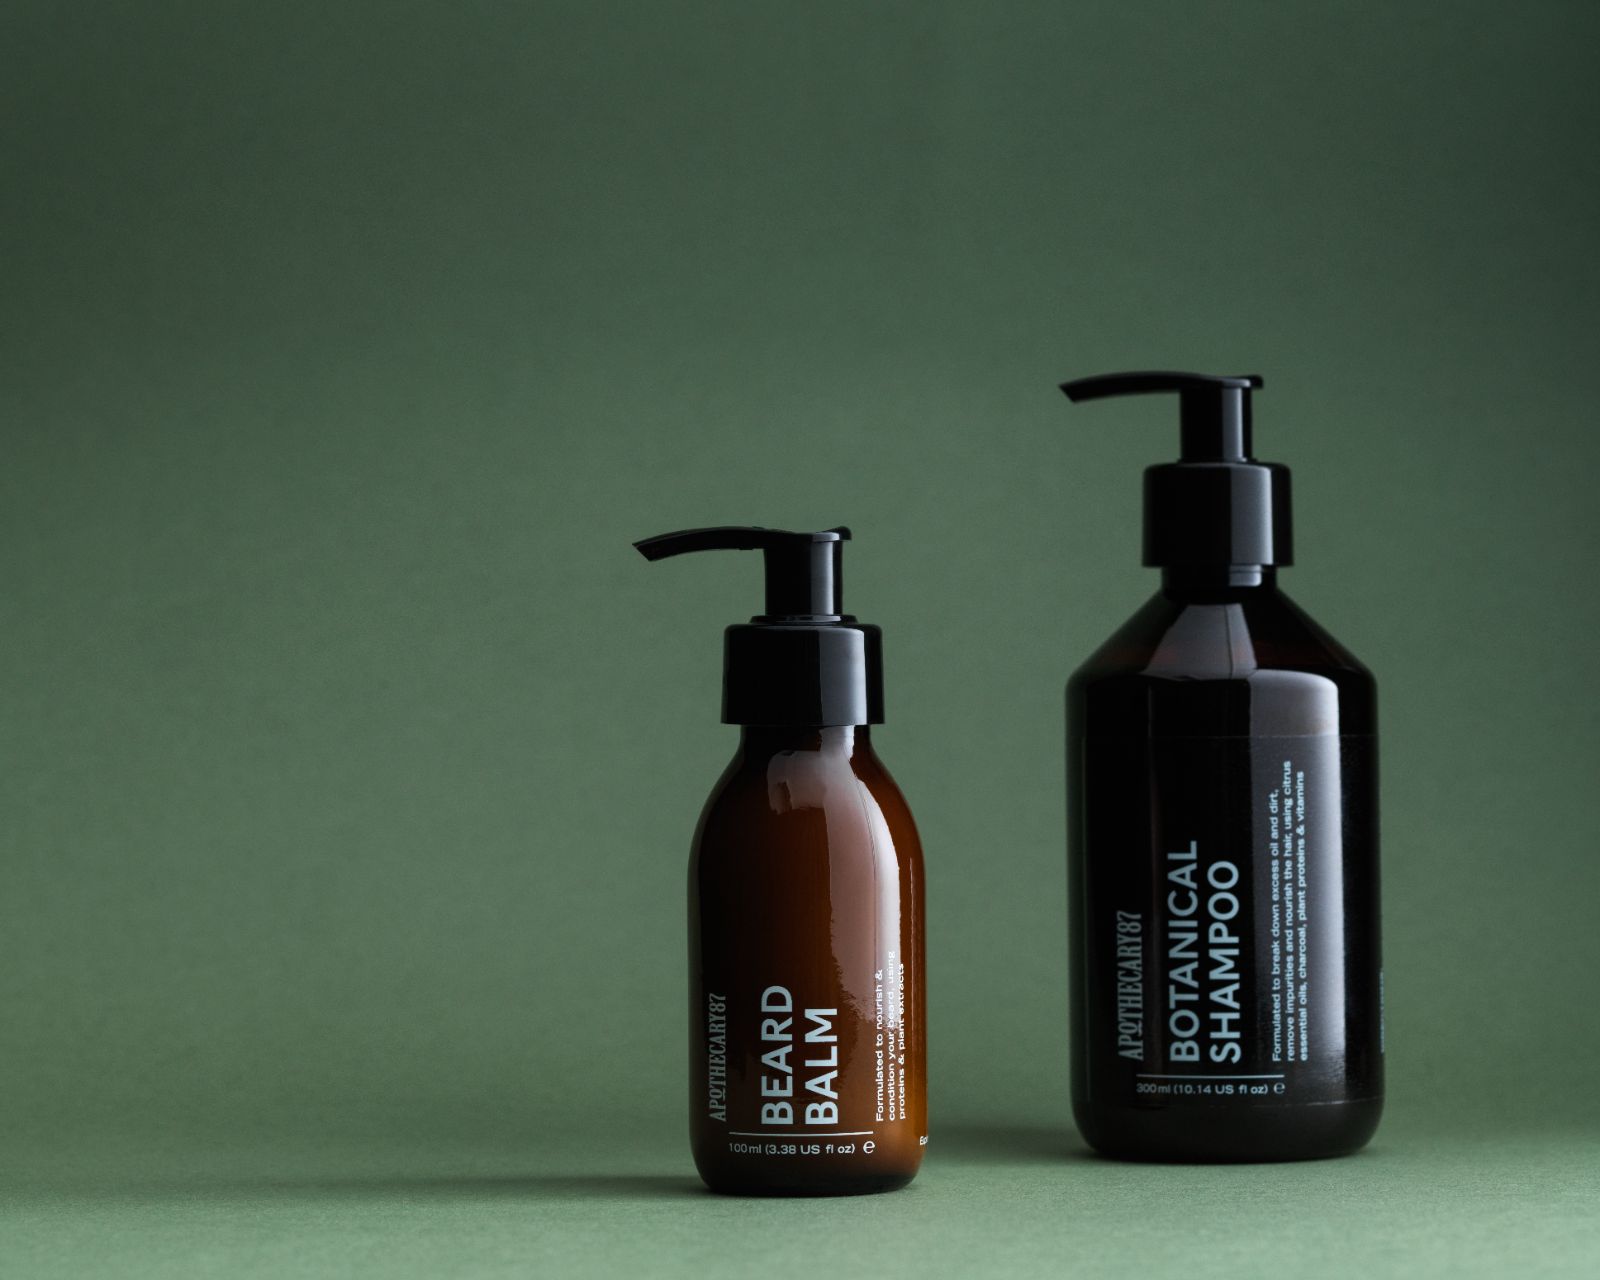 Two natural grooming products by Apothecary 87 Beard Balm, Botanical Shampoo. - branding and packaging design by 93ft Design. 